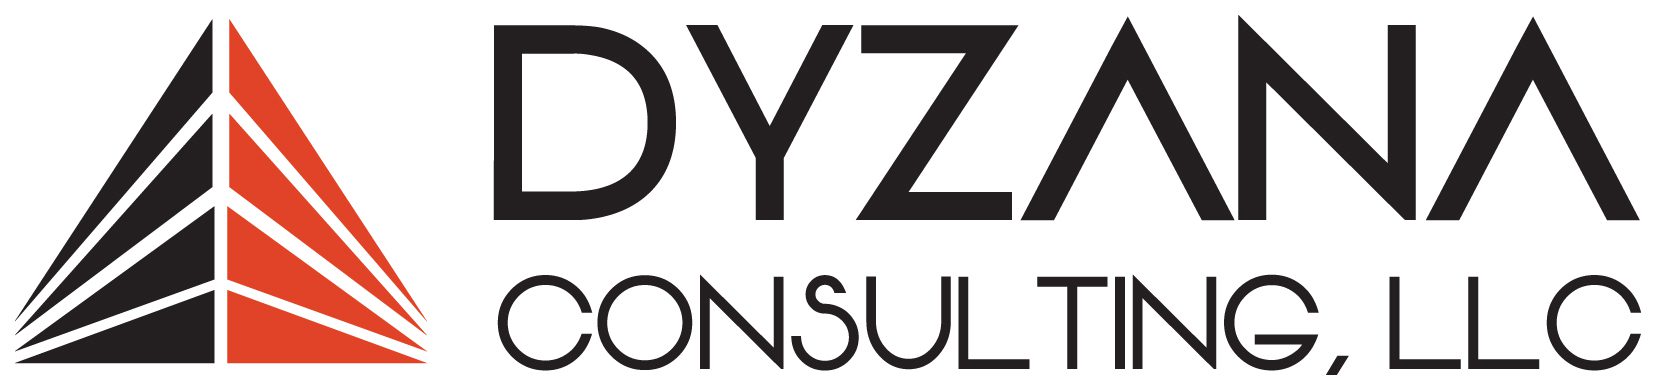 Dyzana Consulting, LLC | Welcome!